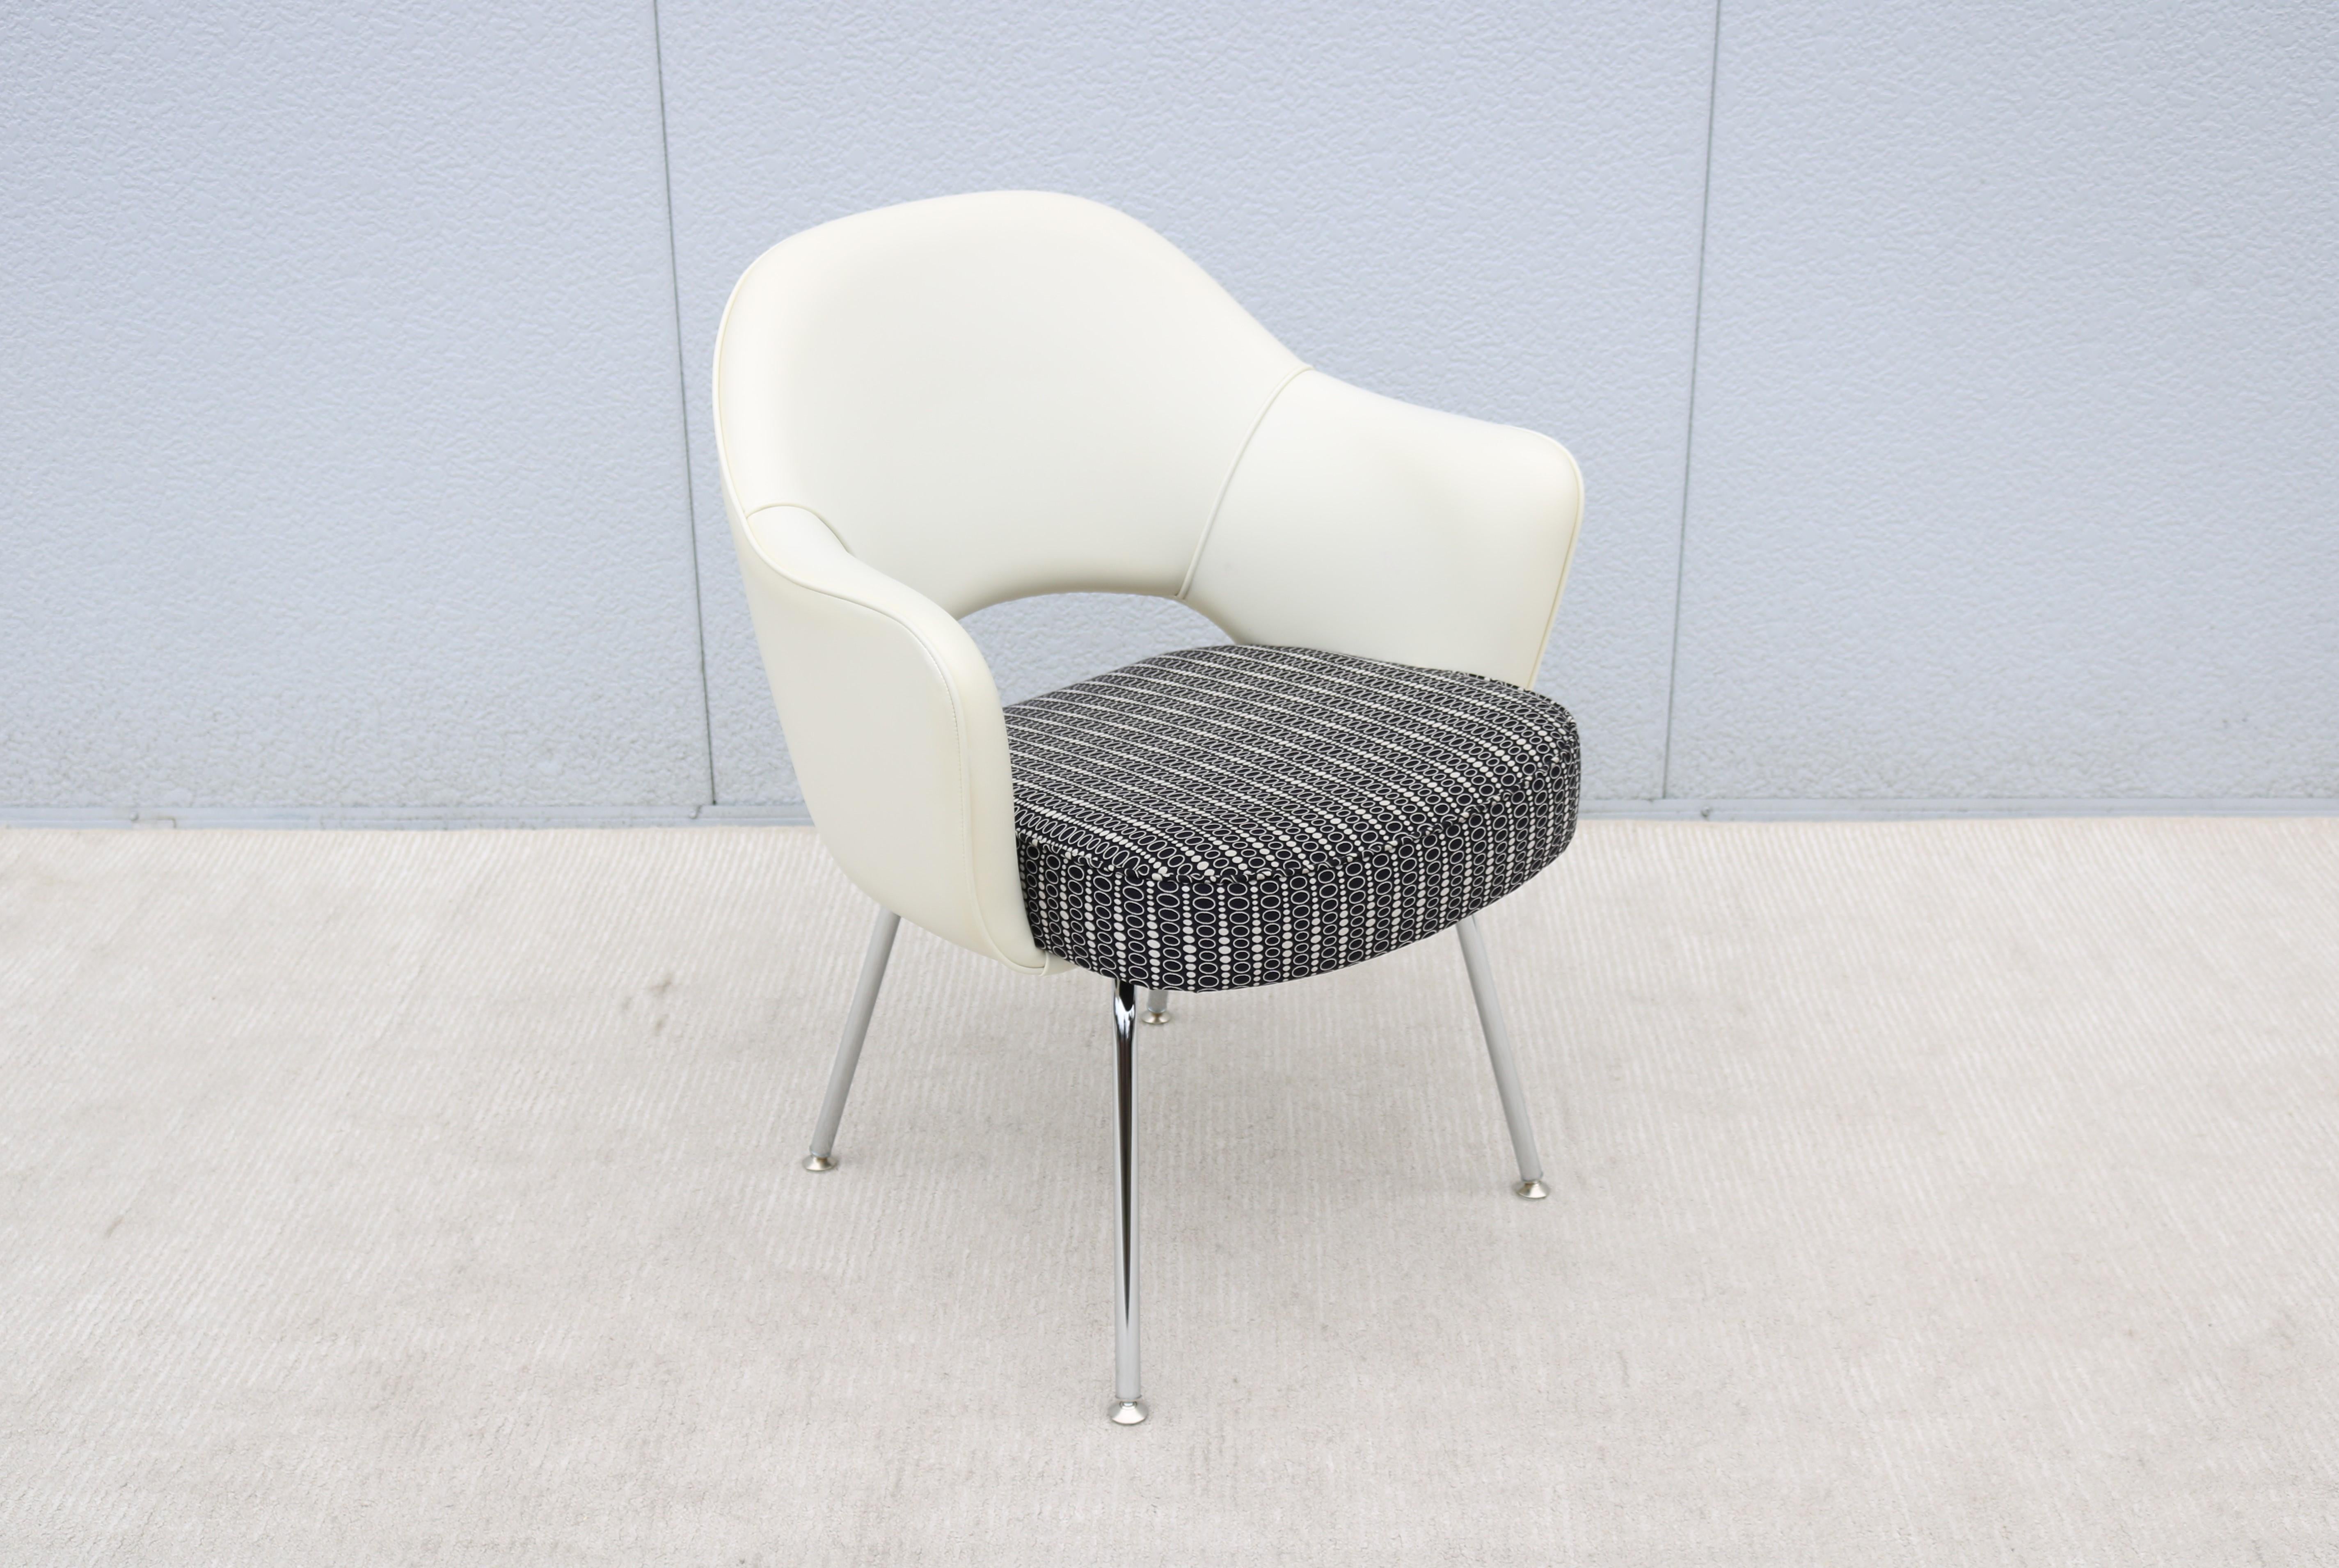 American Mid-Century Modern Eero Saarinen for Knoll White and Black Executive Arm Chair For Sale